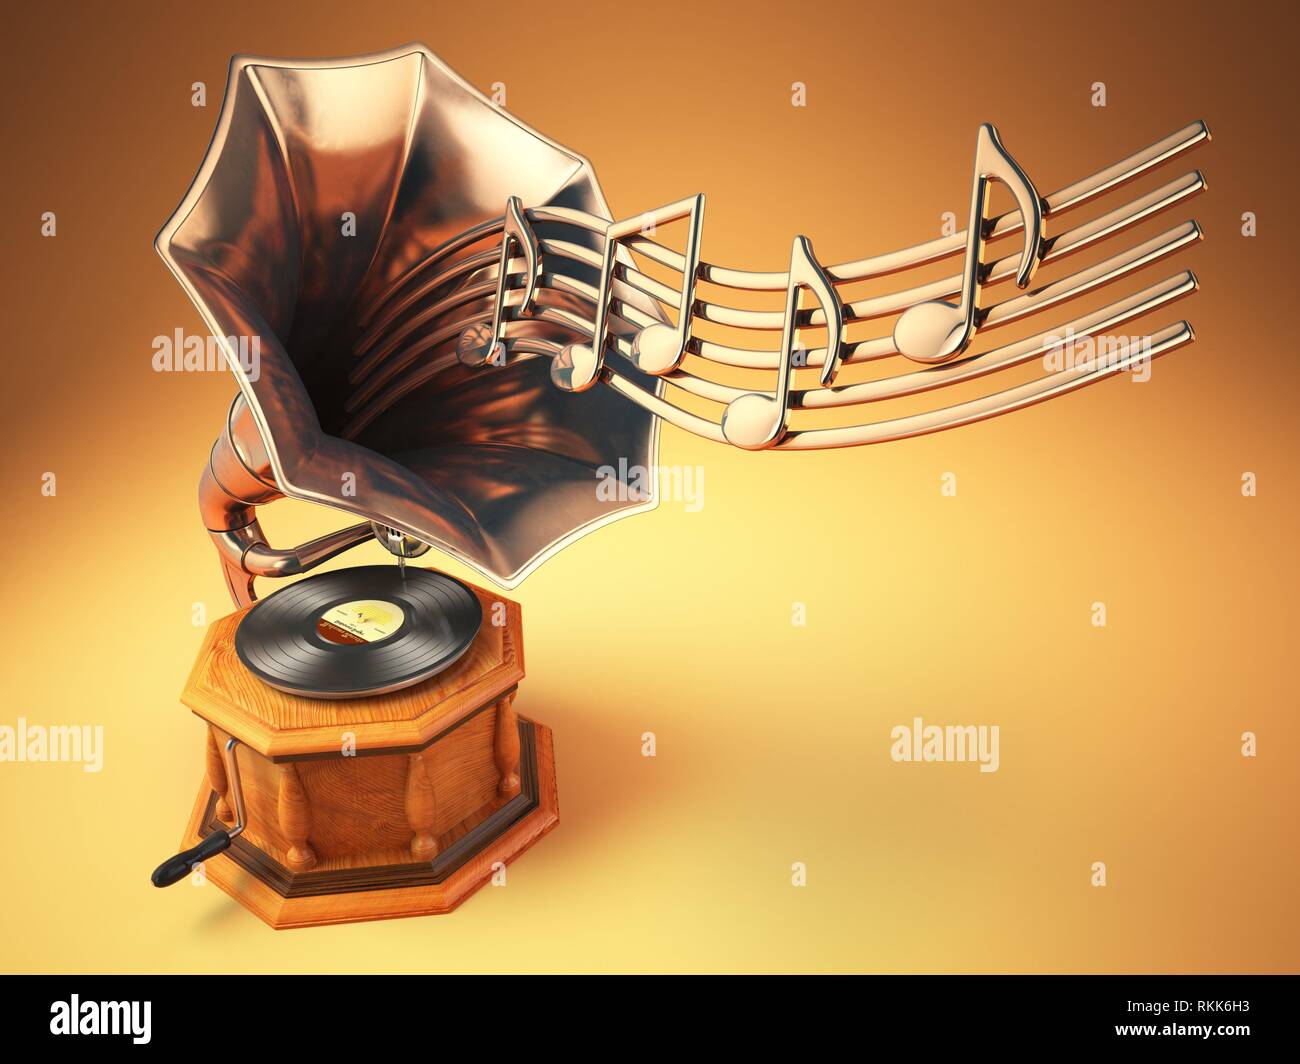 Vintage gramophone with gold musical notes. Retro background. 3d illustration. Stock Photo